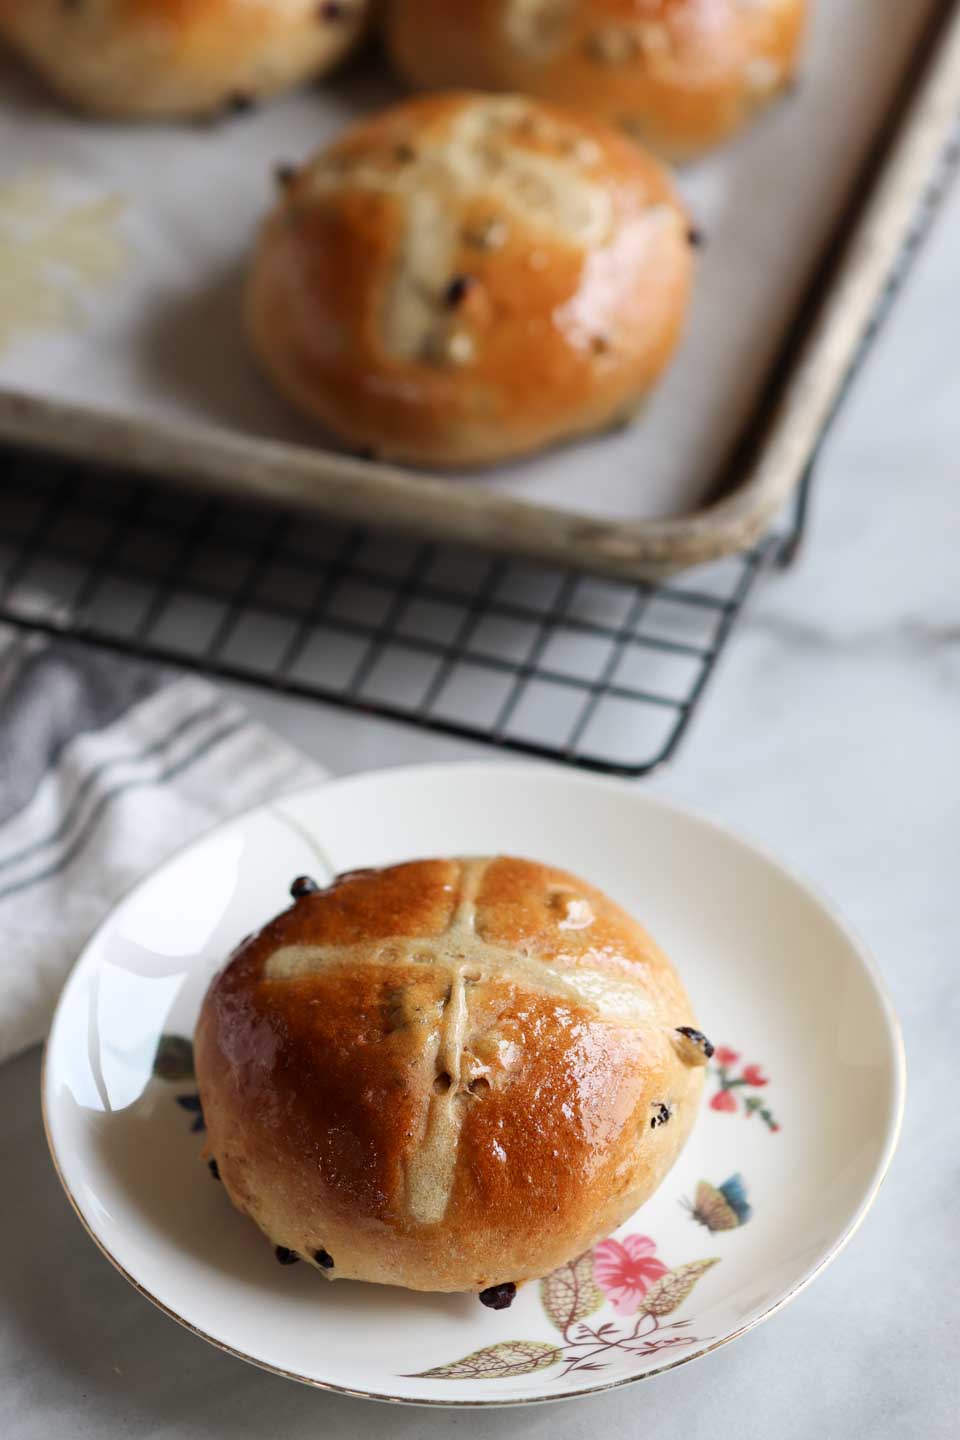 Classic hot cross buns with traditional spices like clove, cinnamon and orange zest made eggless